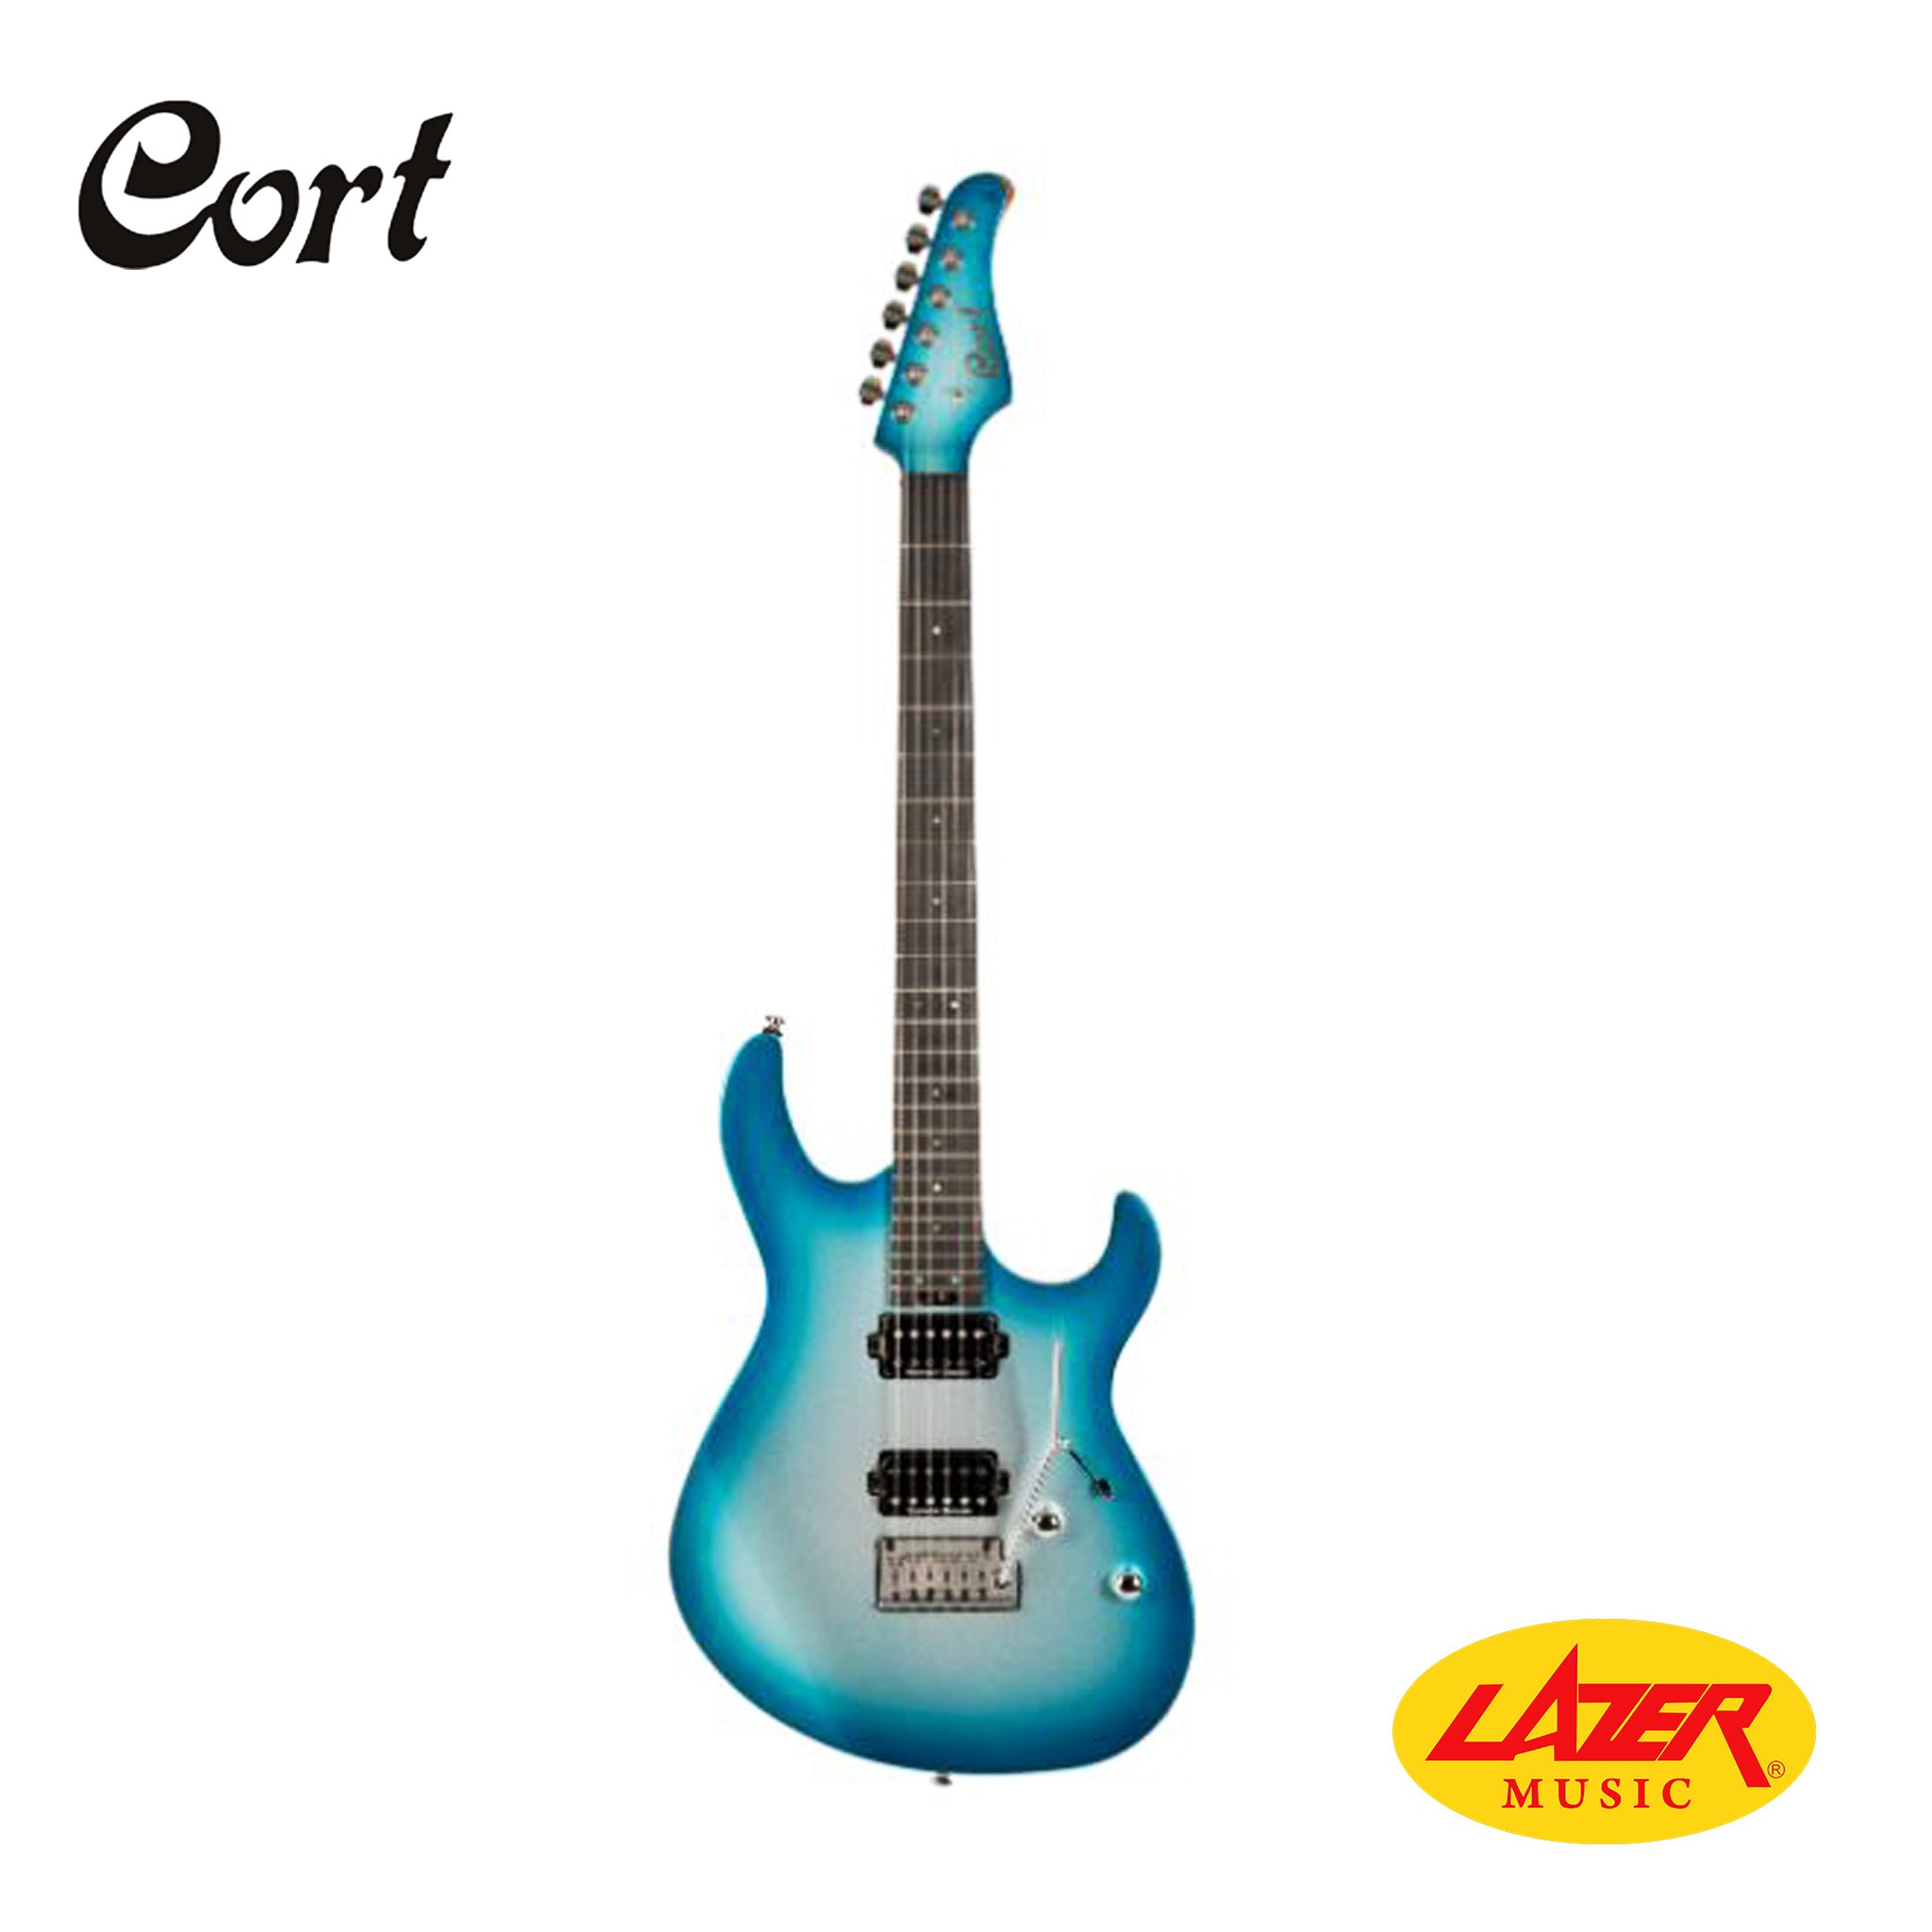 Cort G300 GLAM-PIMB Glam G Series Modern Stratocaster Style Electric Guitar